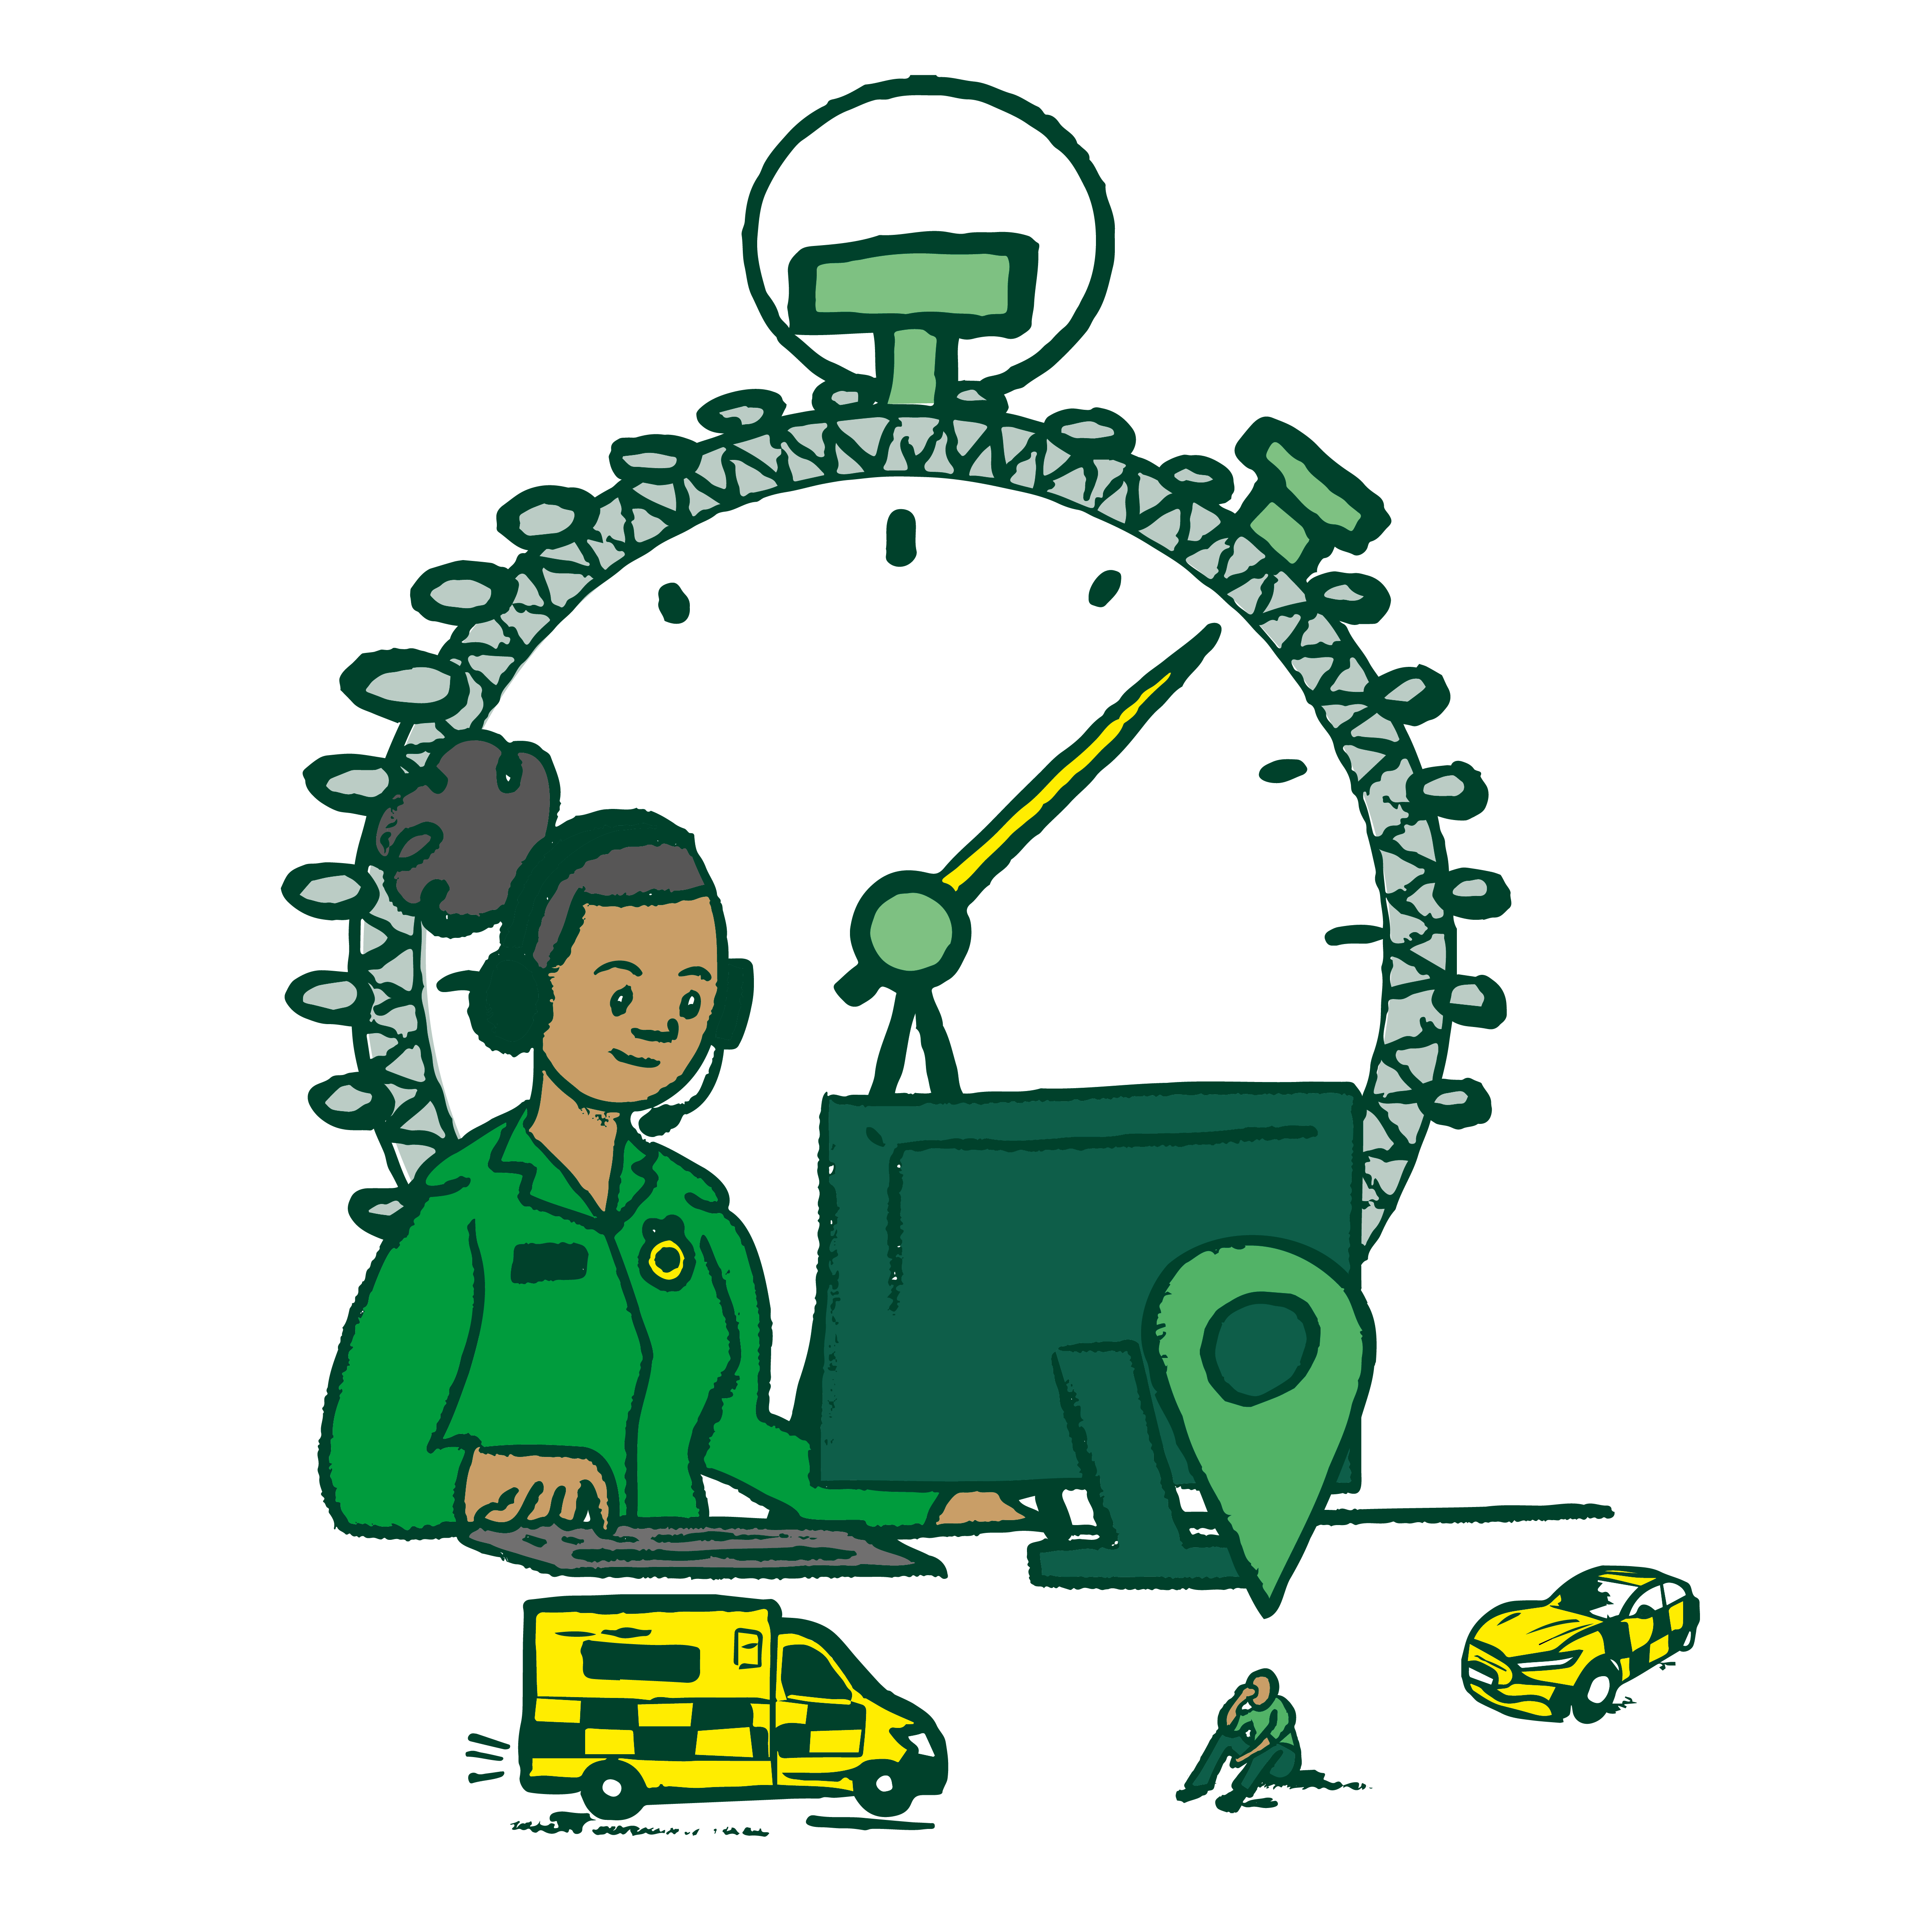 A illustrated image of a emergency call handler, with smaller images of an ambulance, a fast response car and a timer in the background.